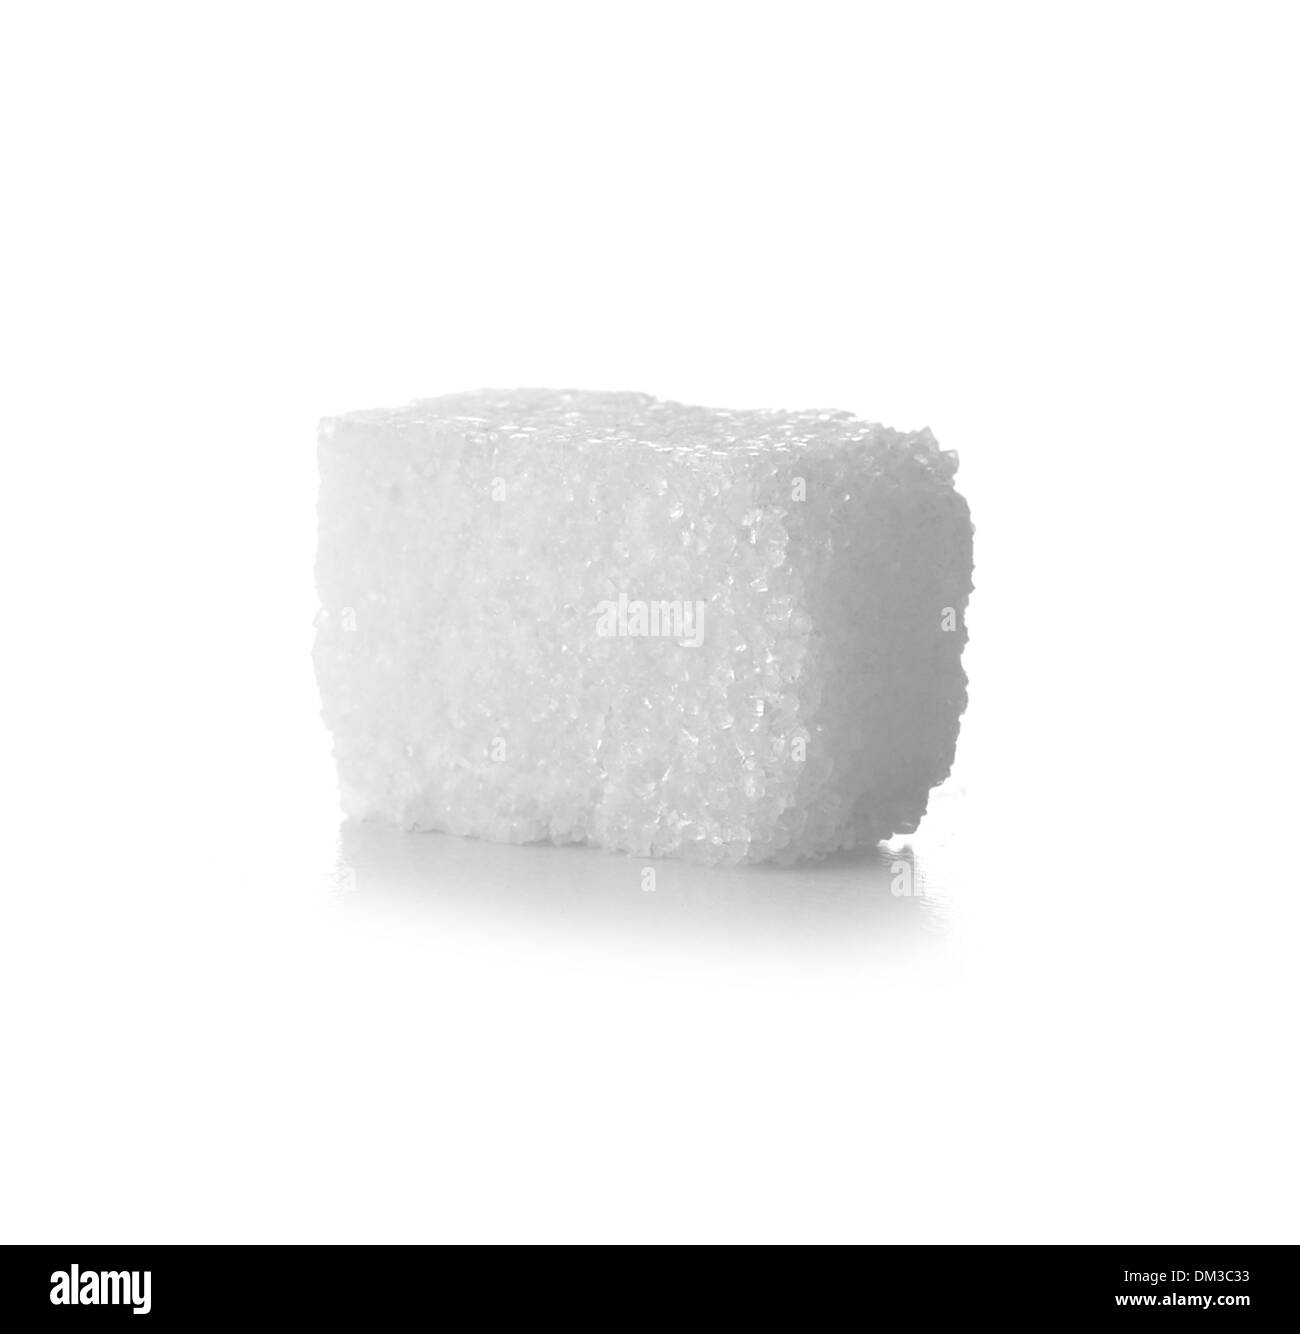 Sugar cube cut out on white background Stock Photo